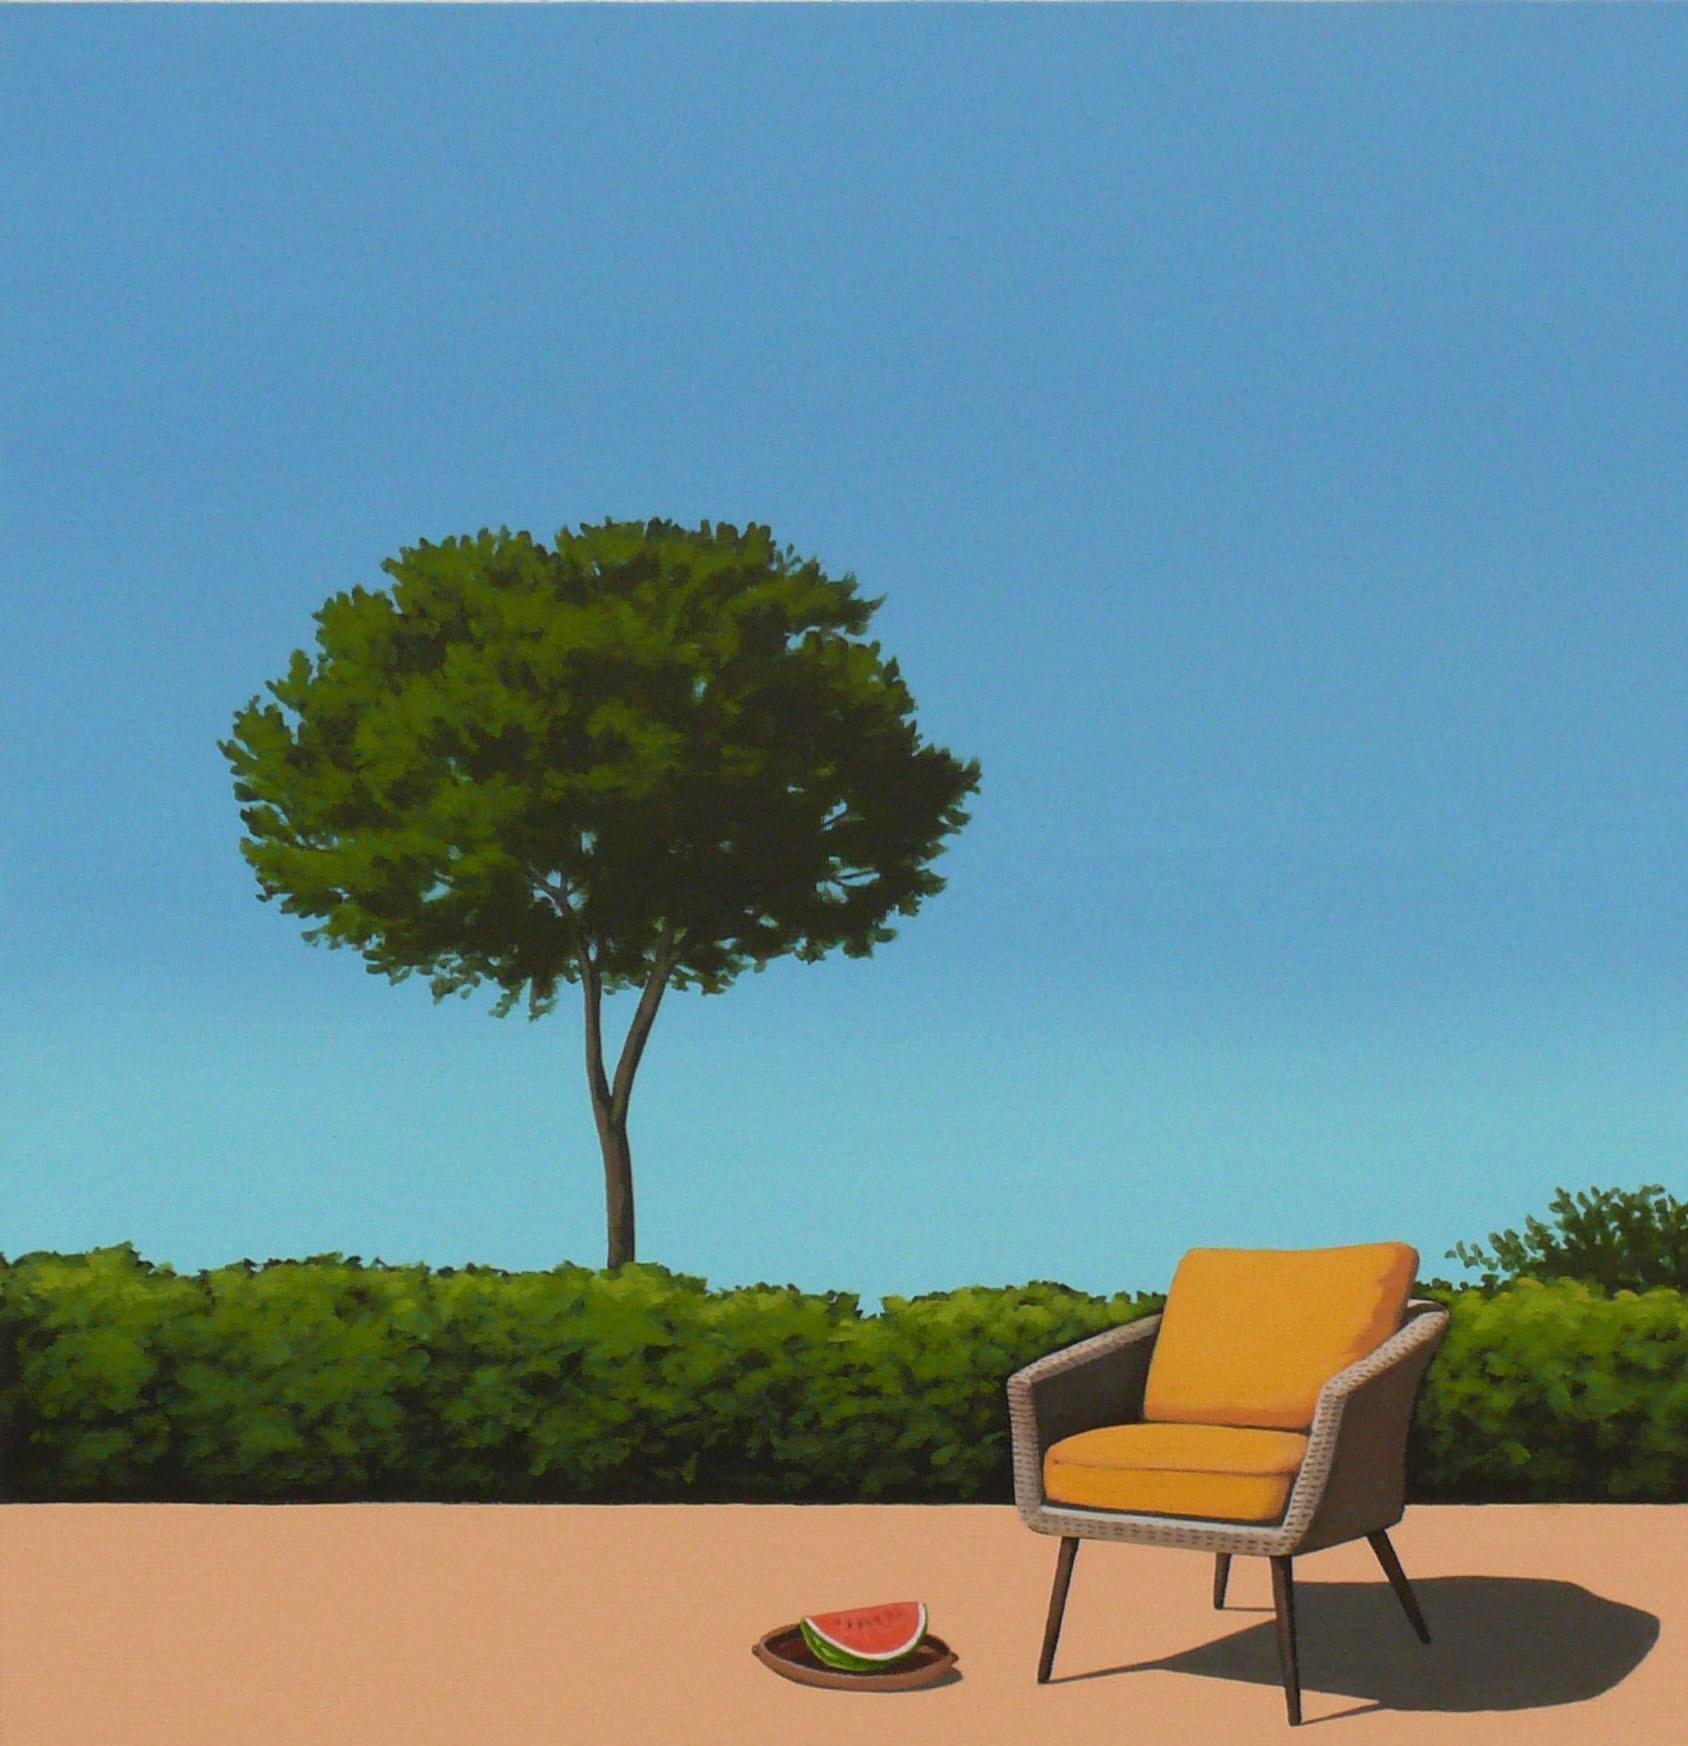 Watermelon by the pool - landscape painting 1